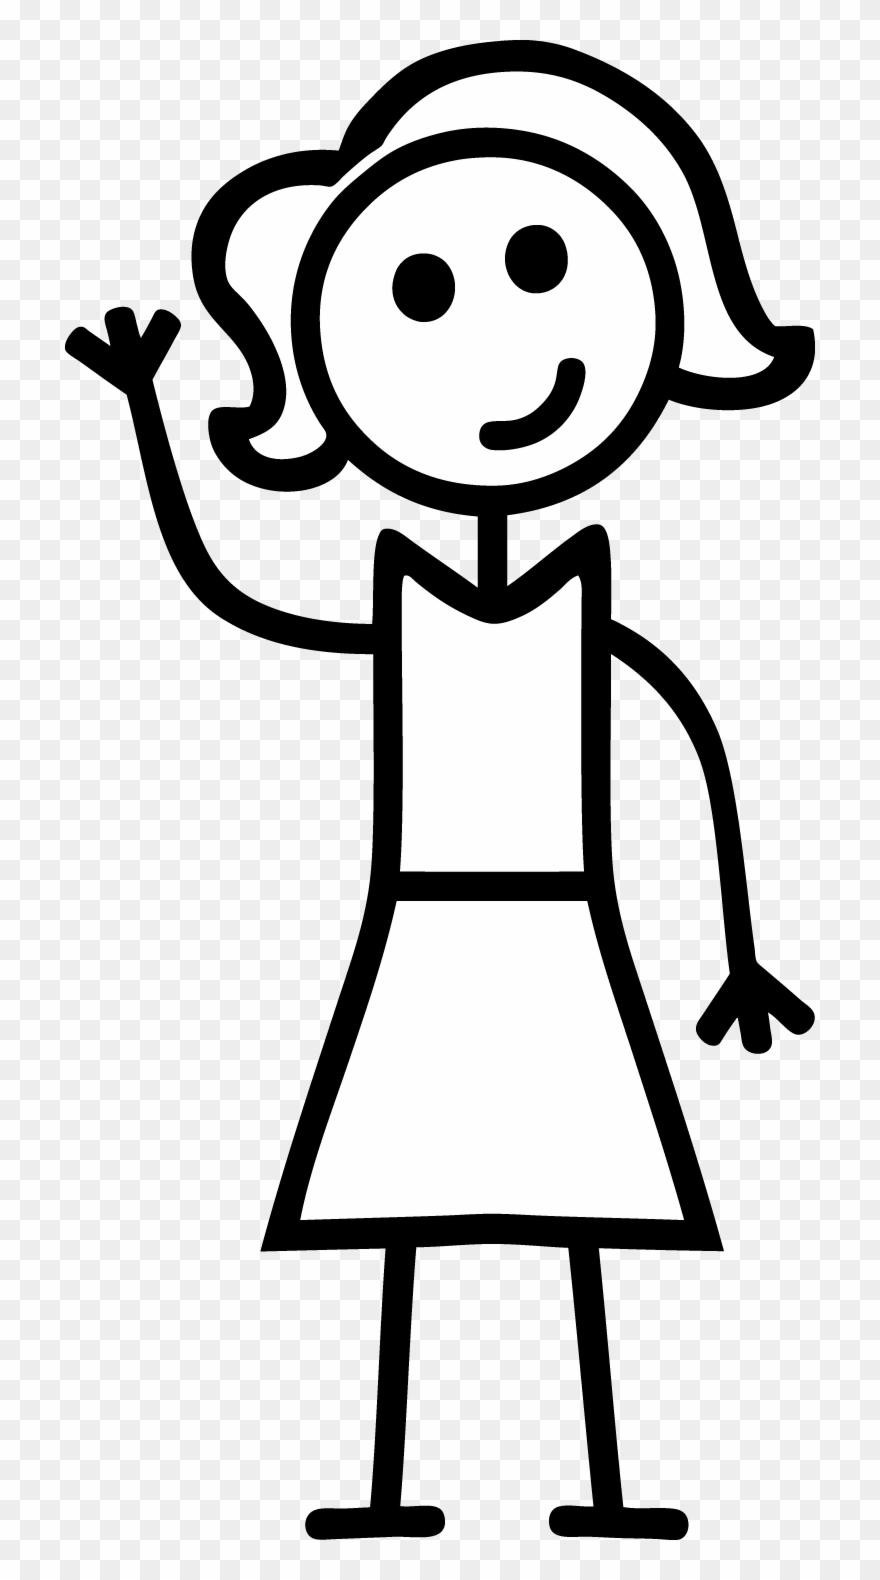 Stick Figure Girl Png & Free Stick Figure Girl.png.